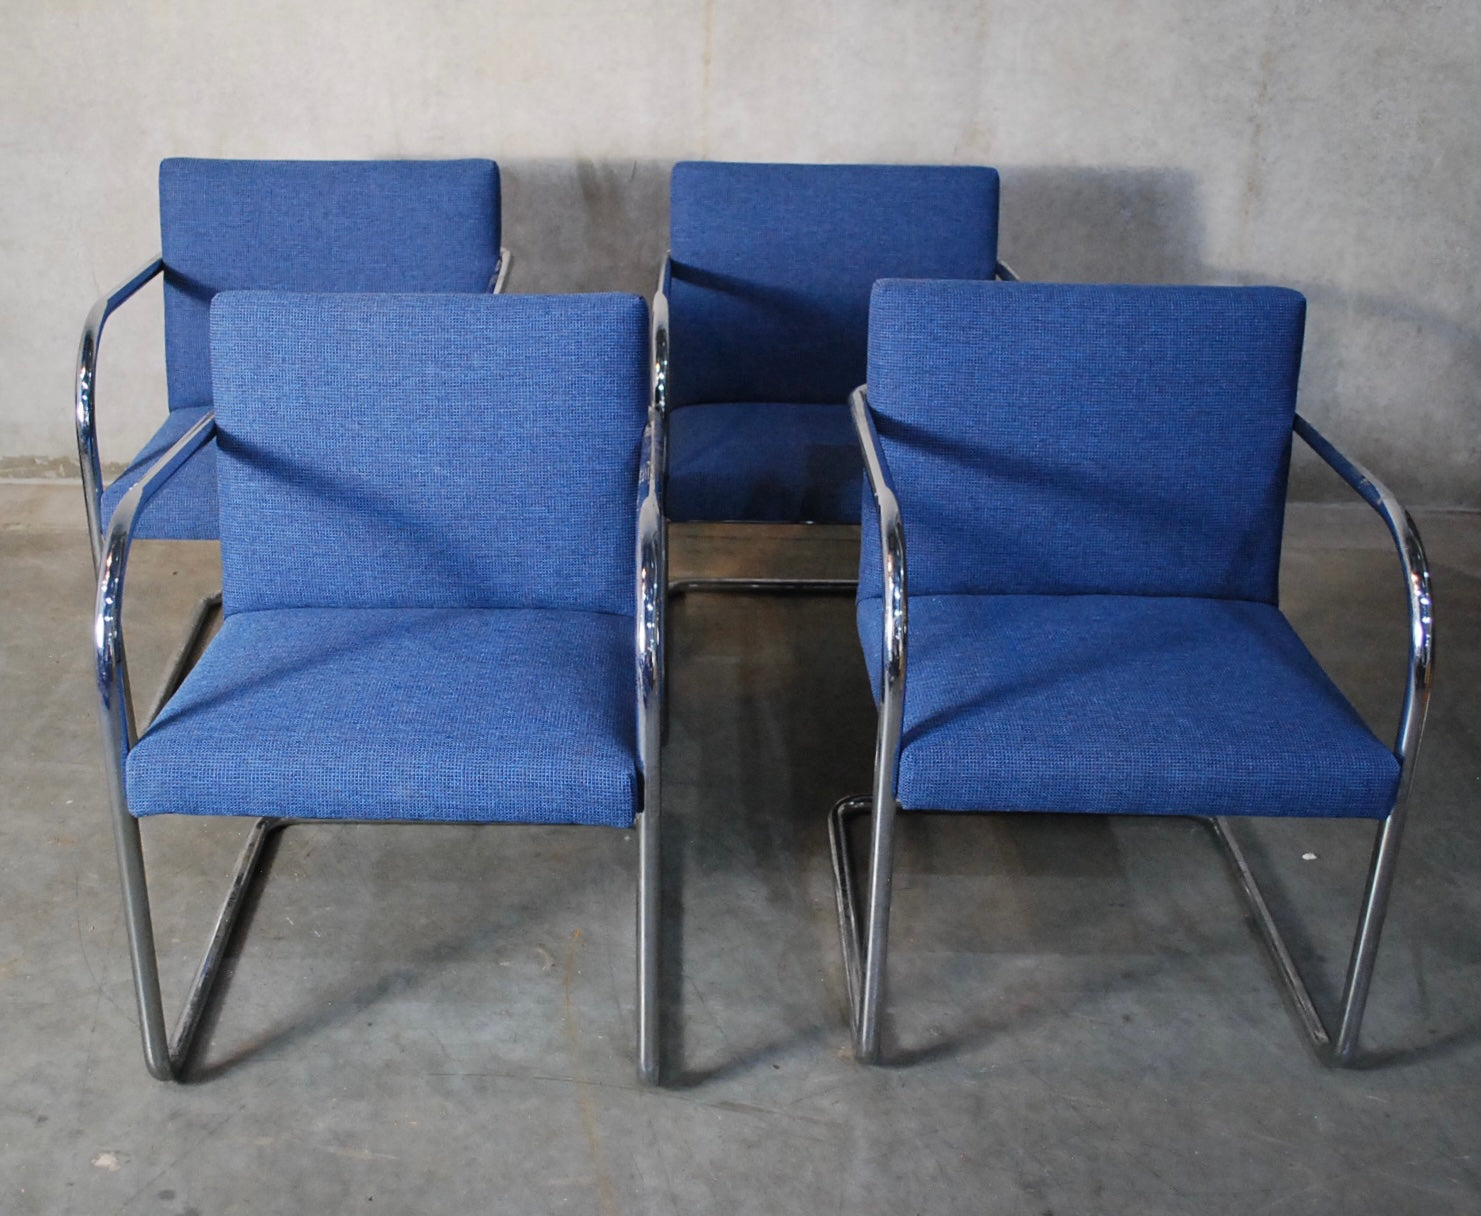 Mid Century Modern Mies Van der Rohe Style Cantilevered Chairs by Thonet | Scott Landon Antiques and Interiors.